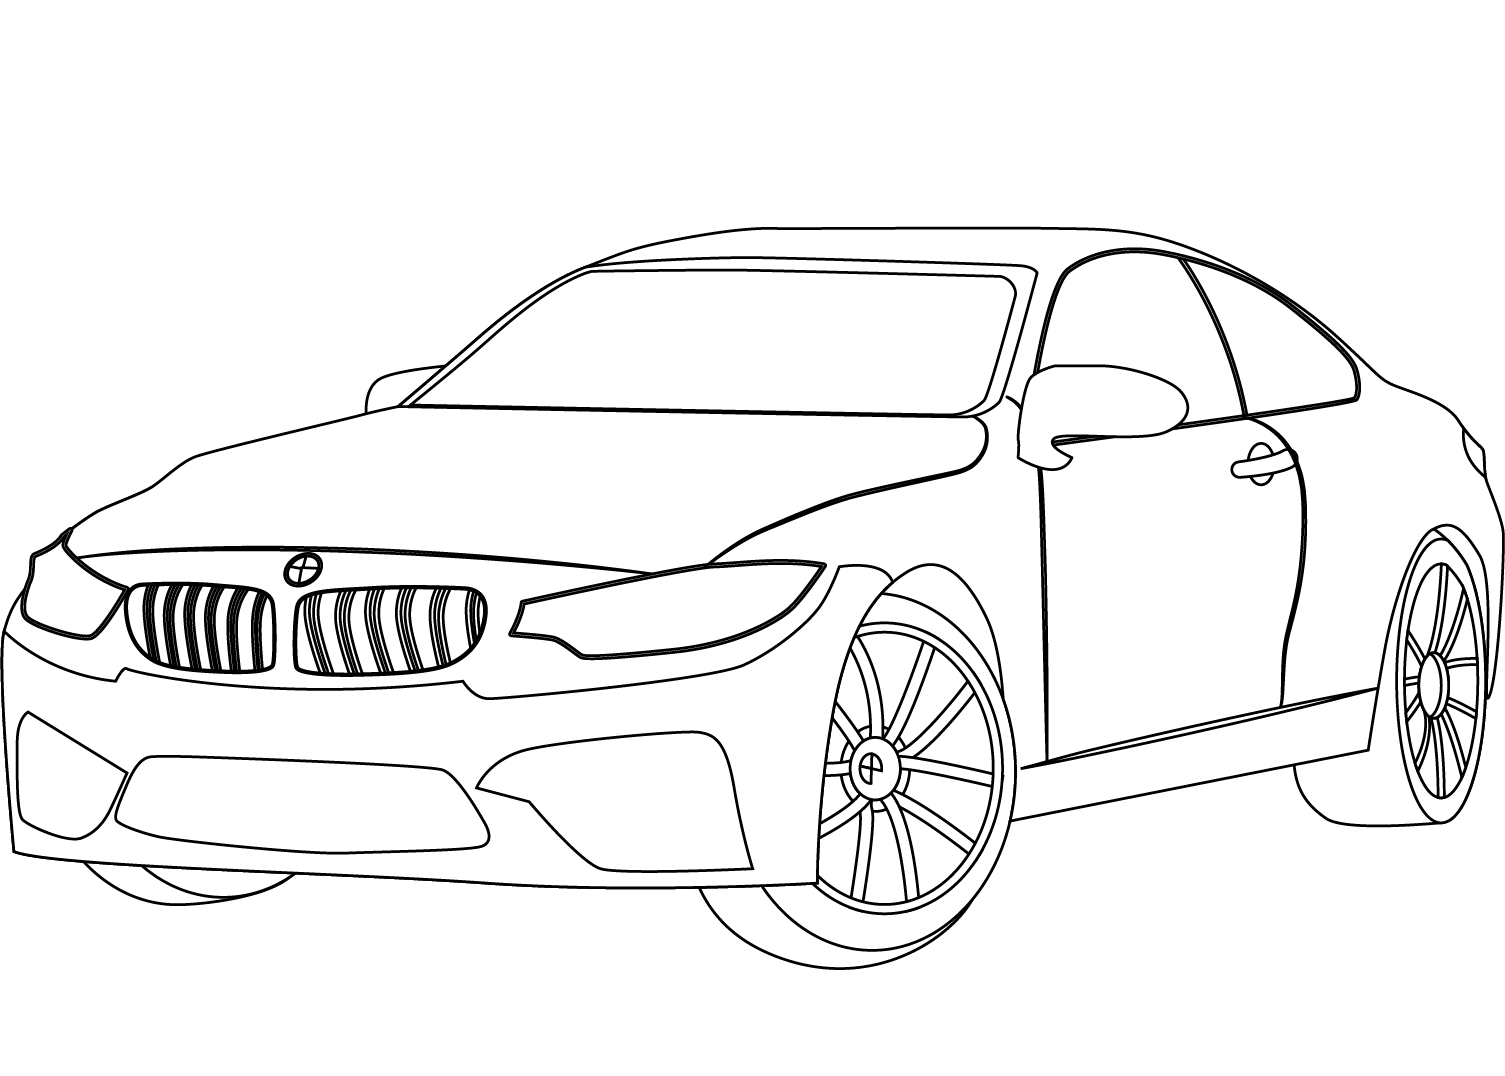 BMW M4 coloring page - ColouringPages